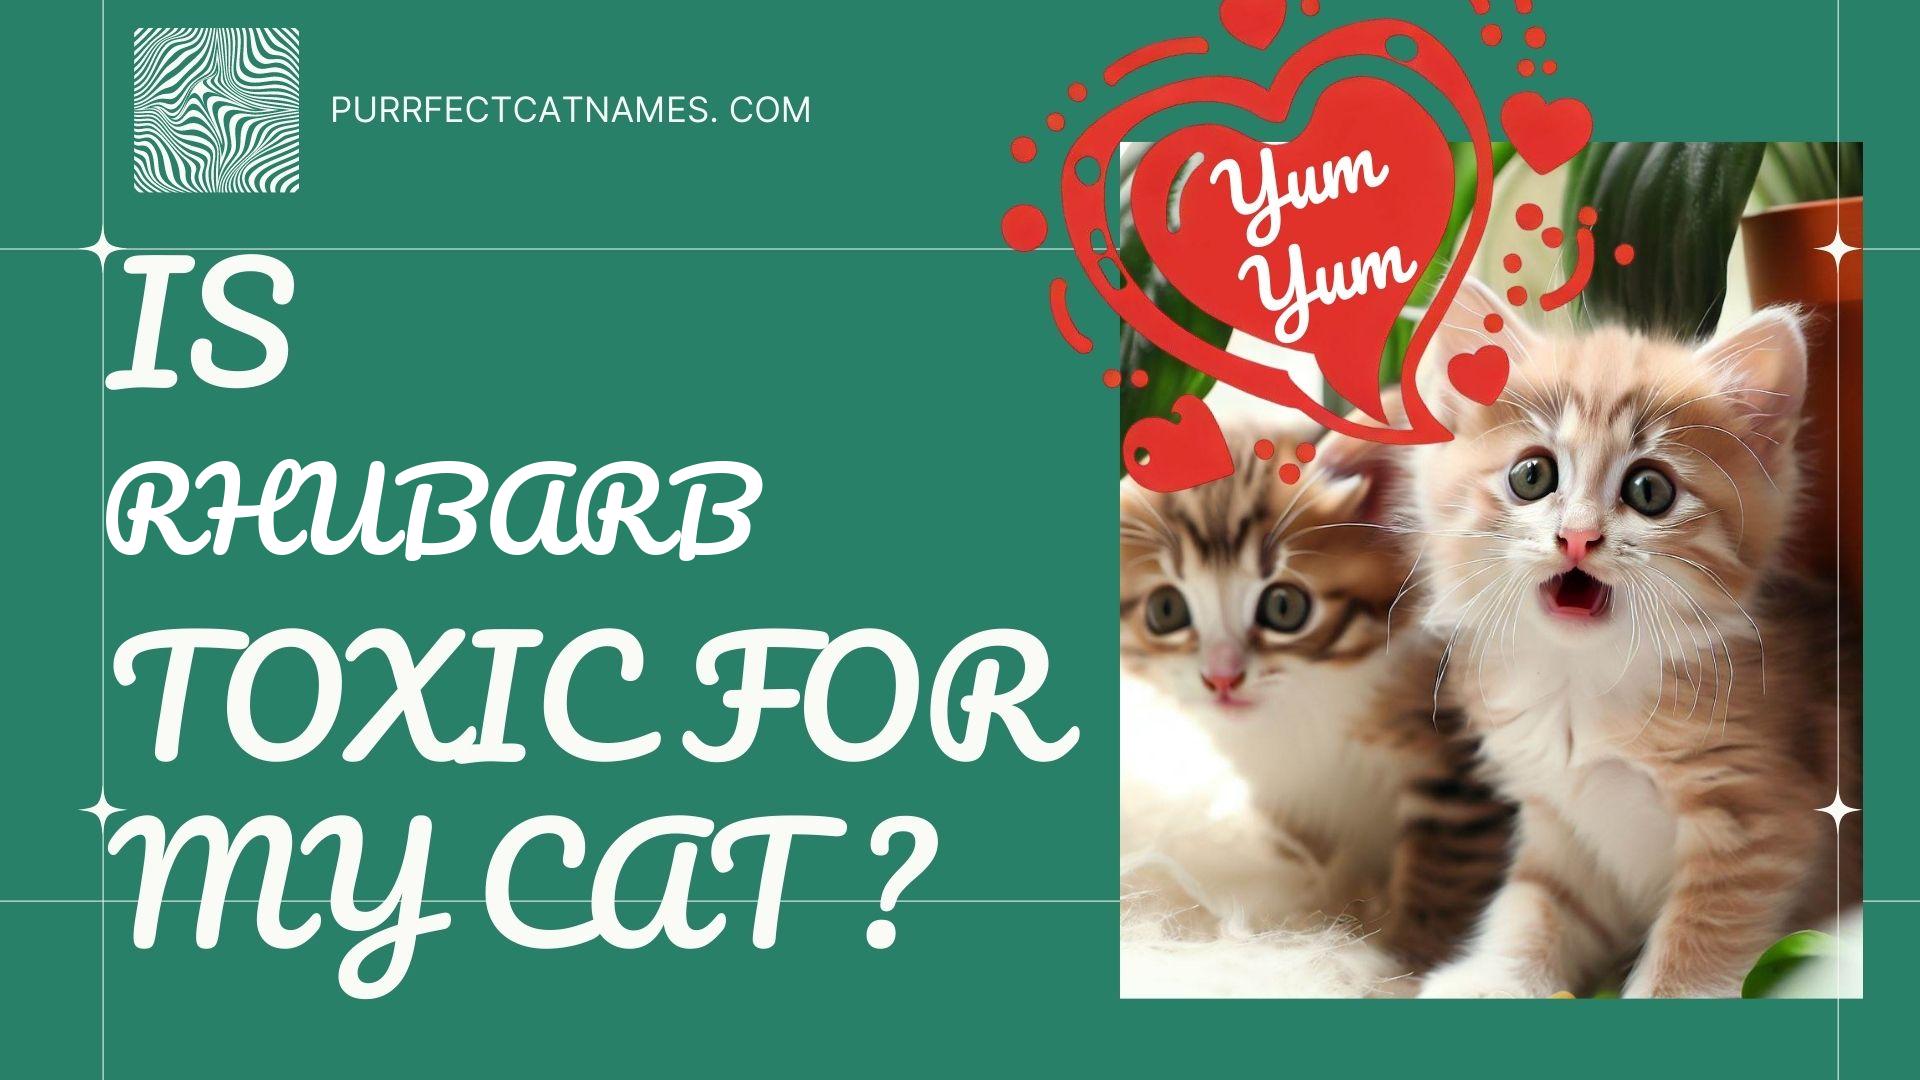 IsRhubarb plant toxic for your cat